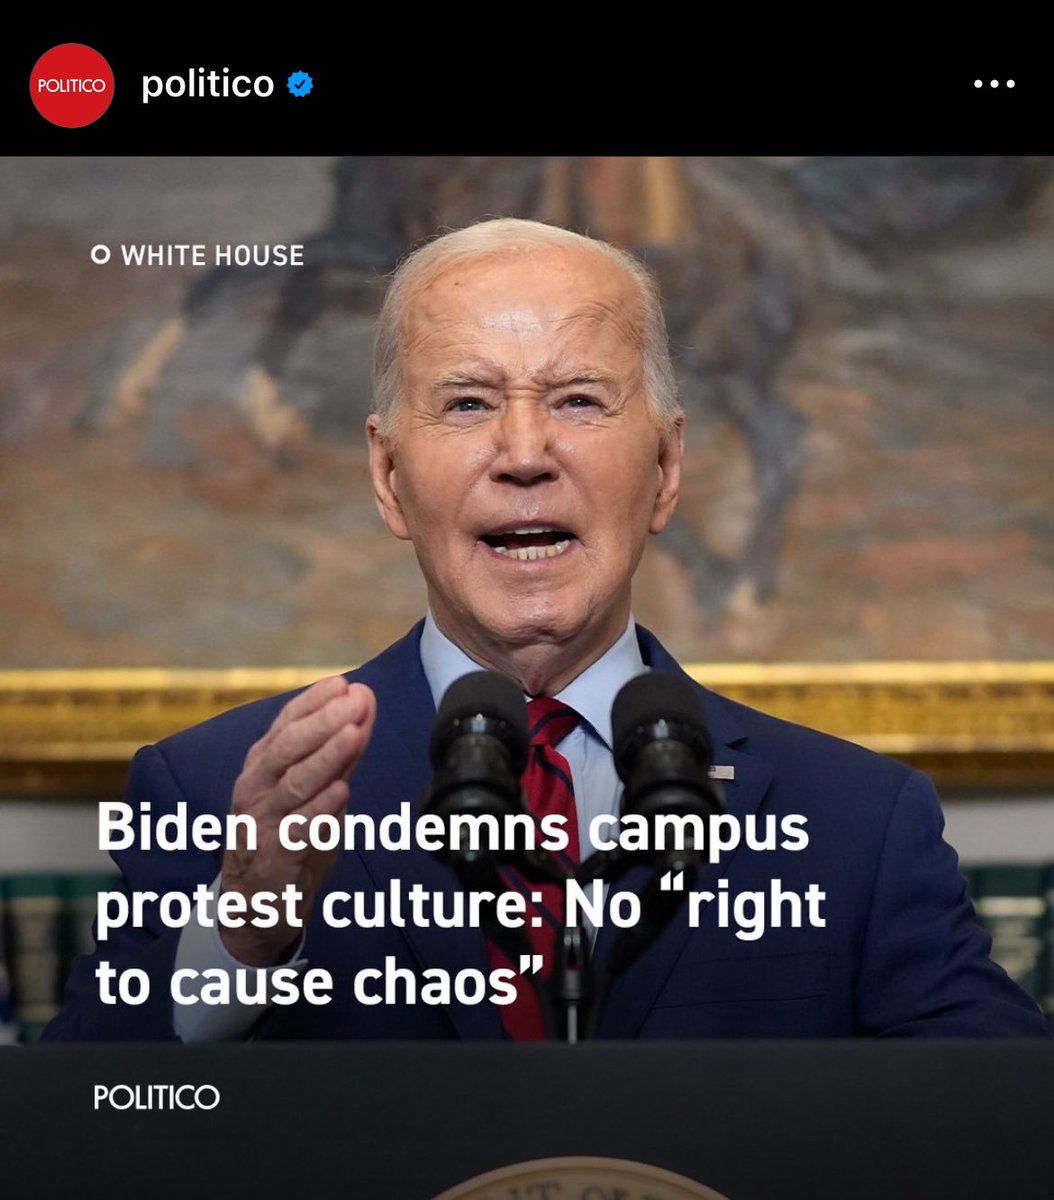 Biden says “No right to cause chaos.” The people say “No right to fund genocide!” Biden is a war criminal and has no moral authority to speak about “chaos!” He is chaos!